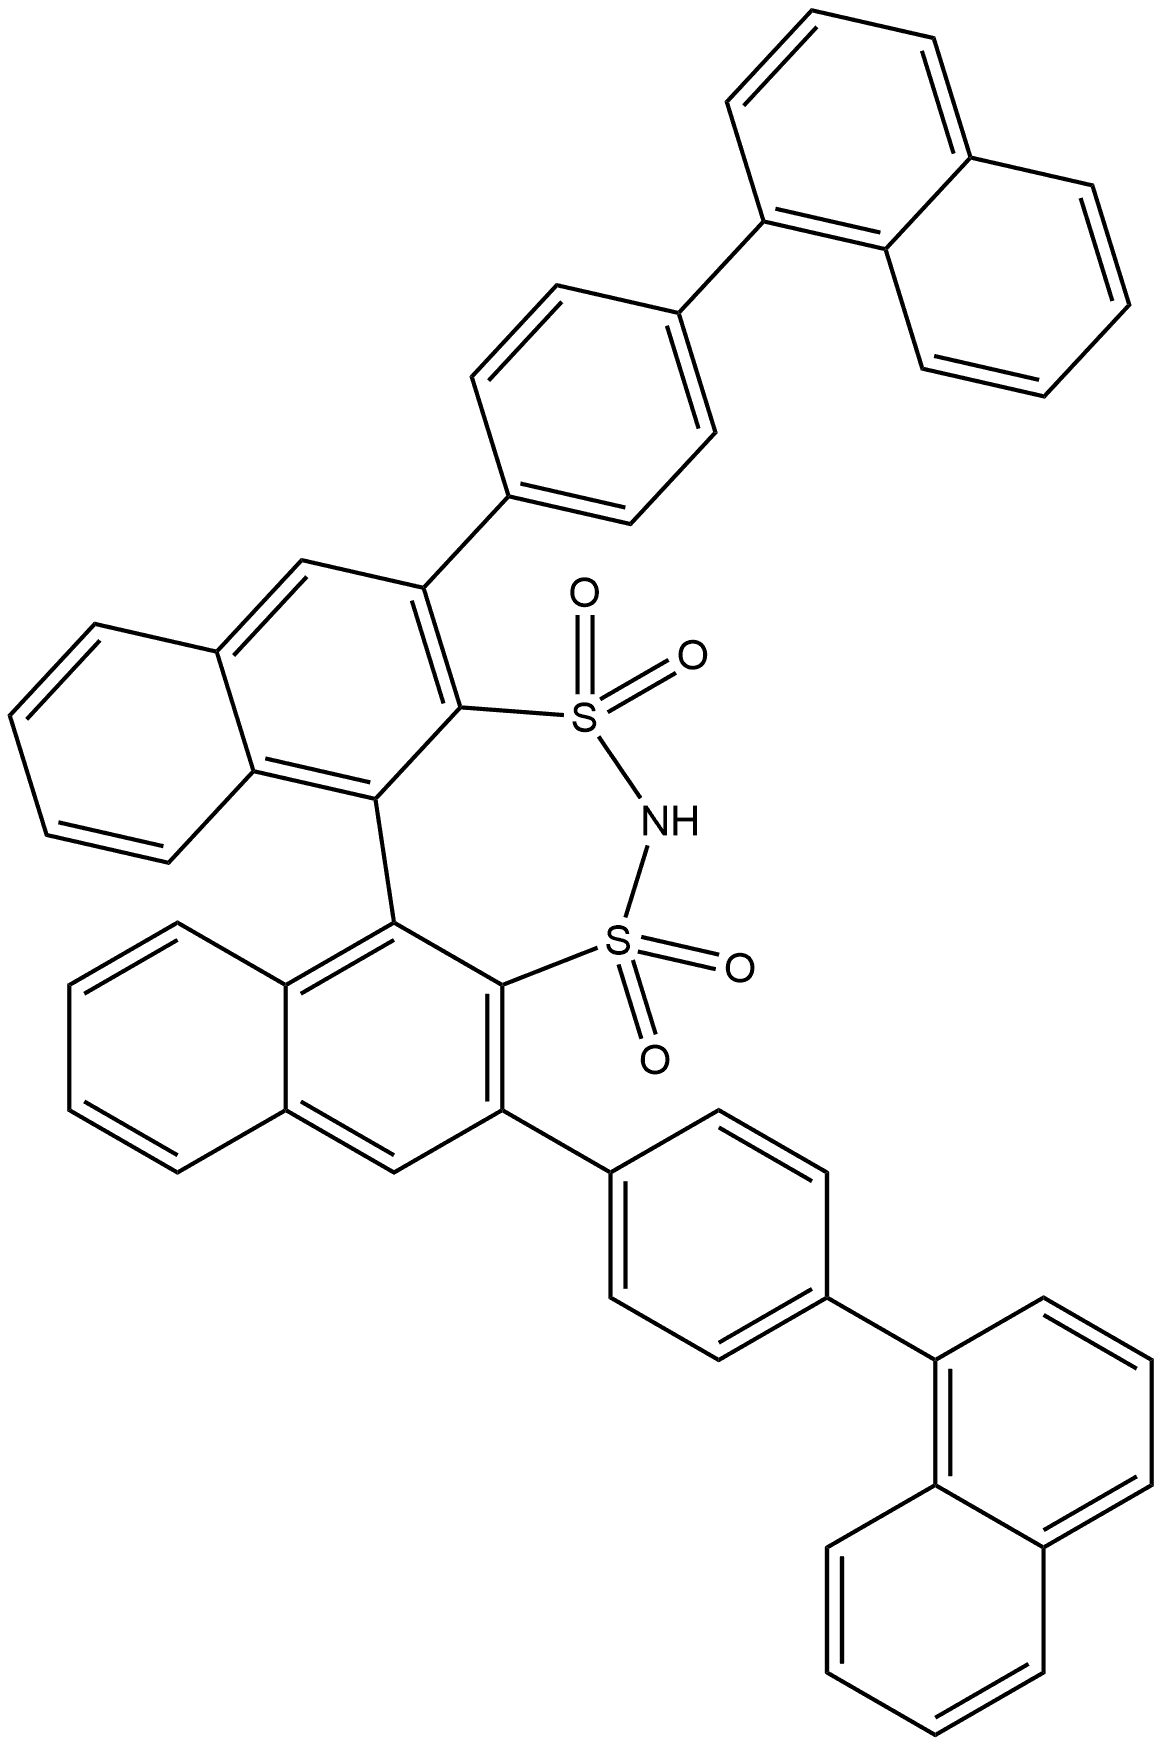 Dinaphtho[2,1-d:1',2'-f][1,3,2]dithiazepine, 2,6-bis[4-(1-naphthalenyl)phenyl]-, 3,3,5,5-tetraoxide, (11bR)- 结构式